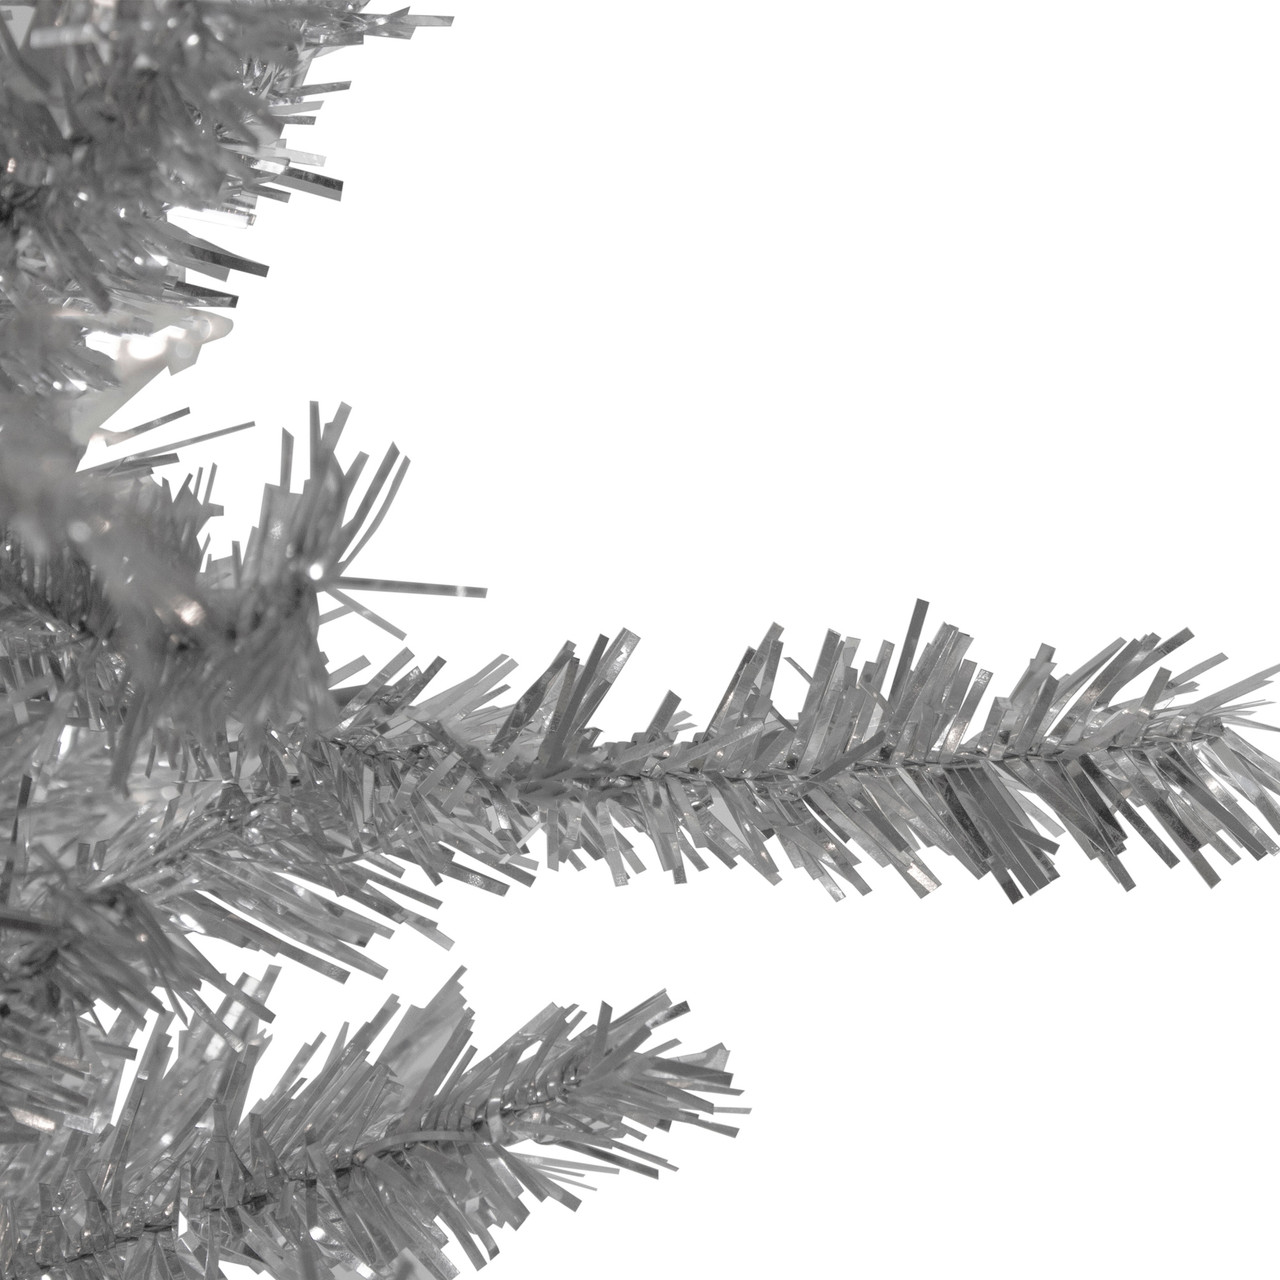 Northlight 4' Holographic Silver Tinsel Slim Artificial Christmas Tree -  Unlit